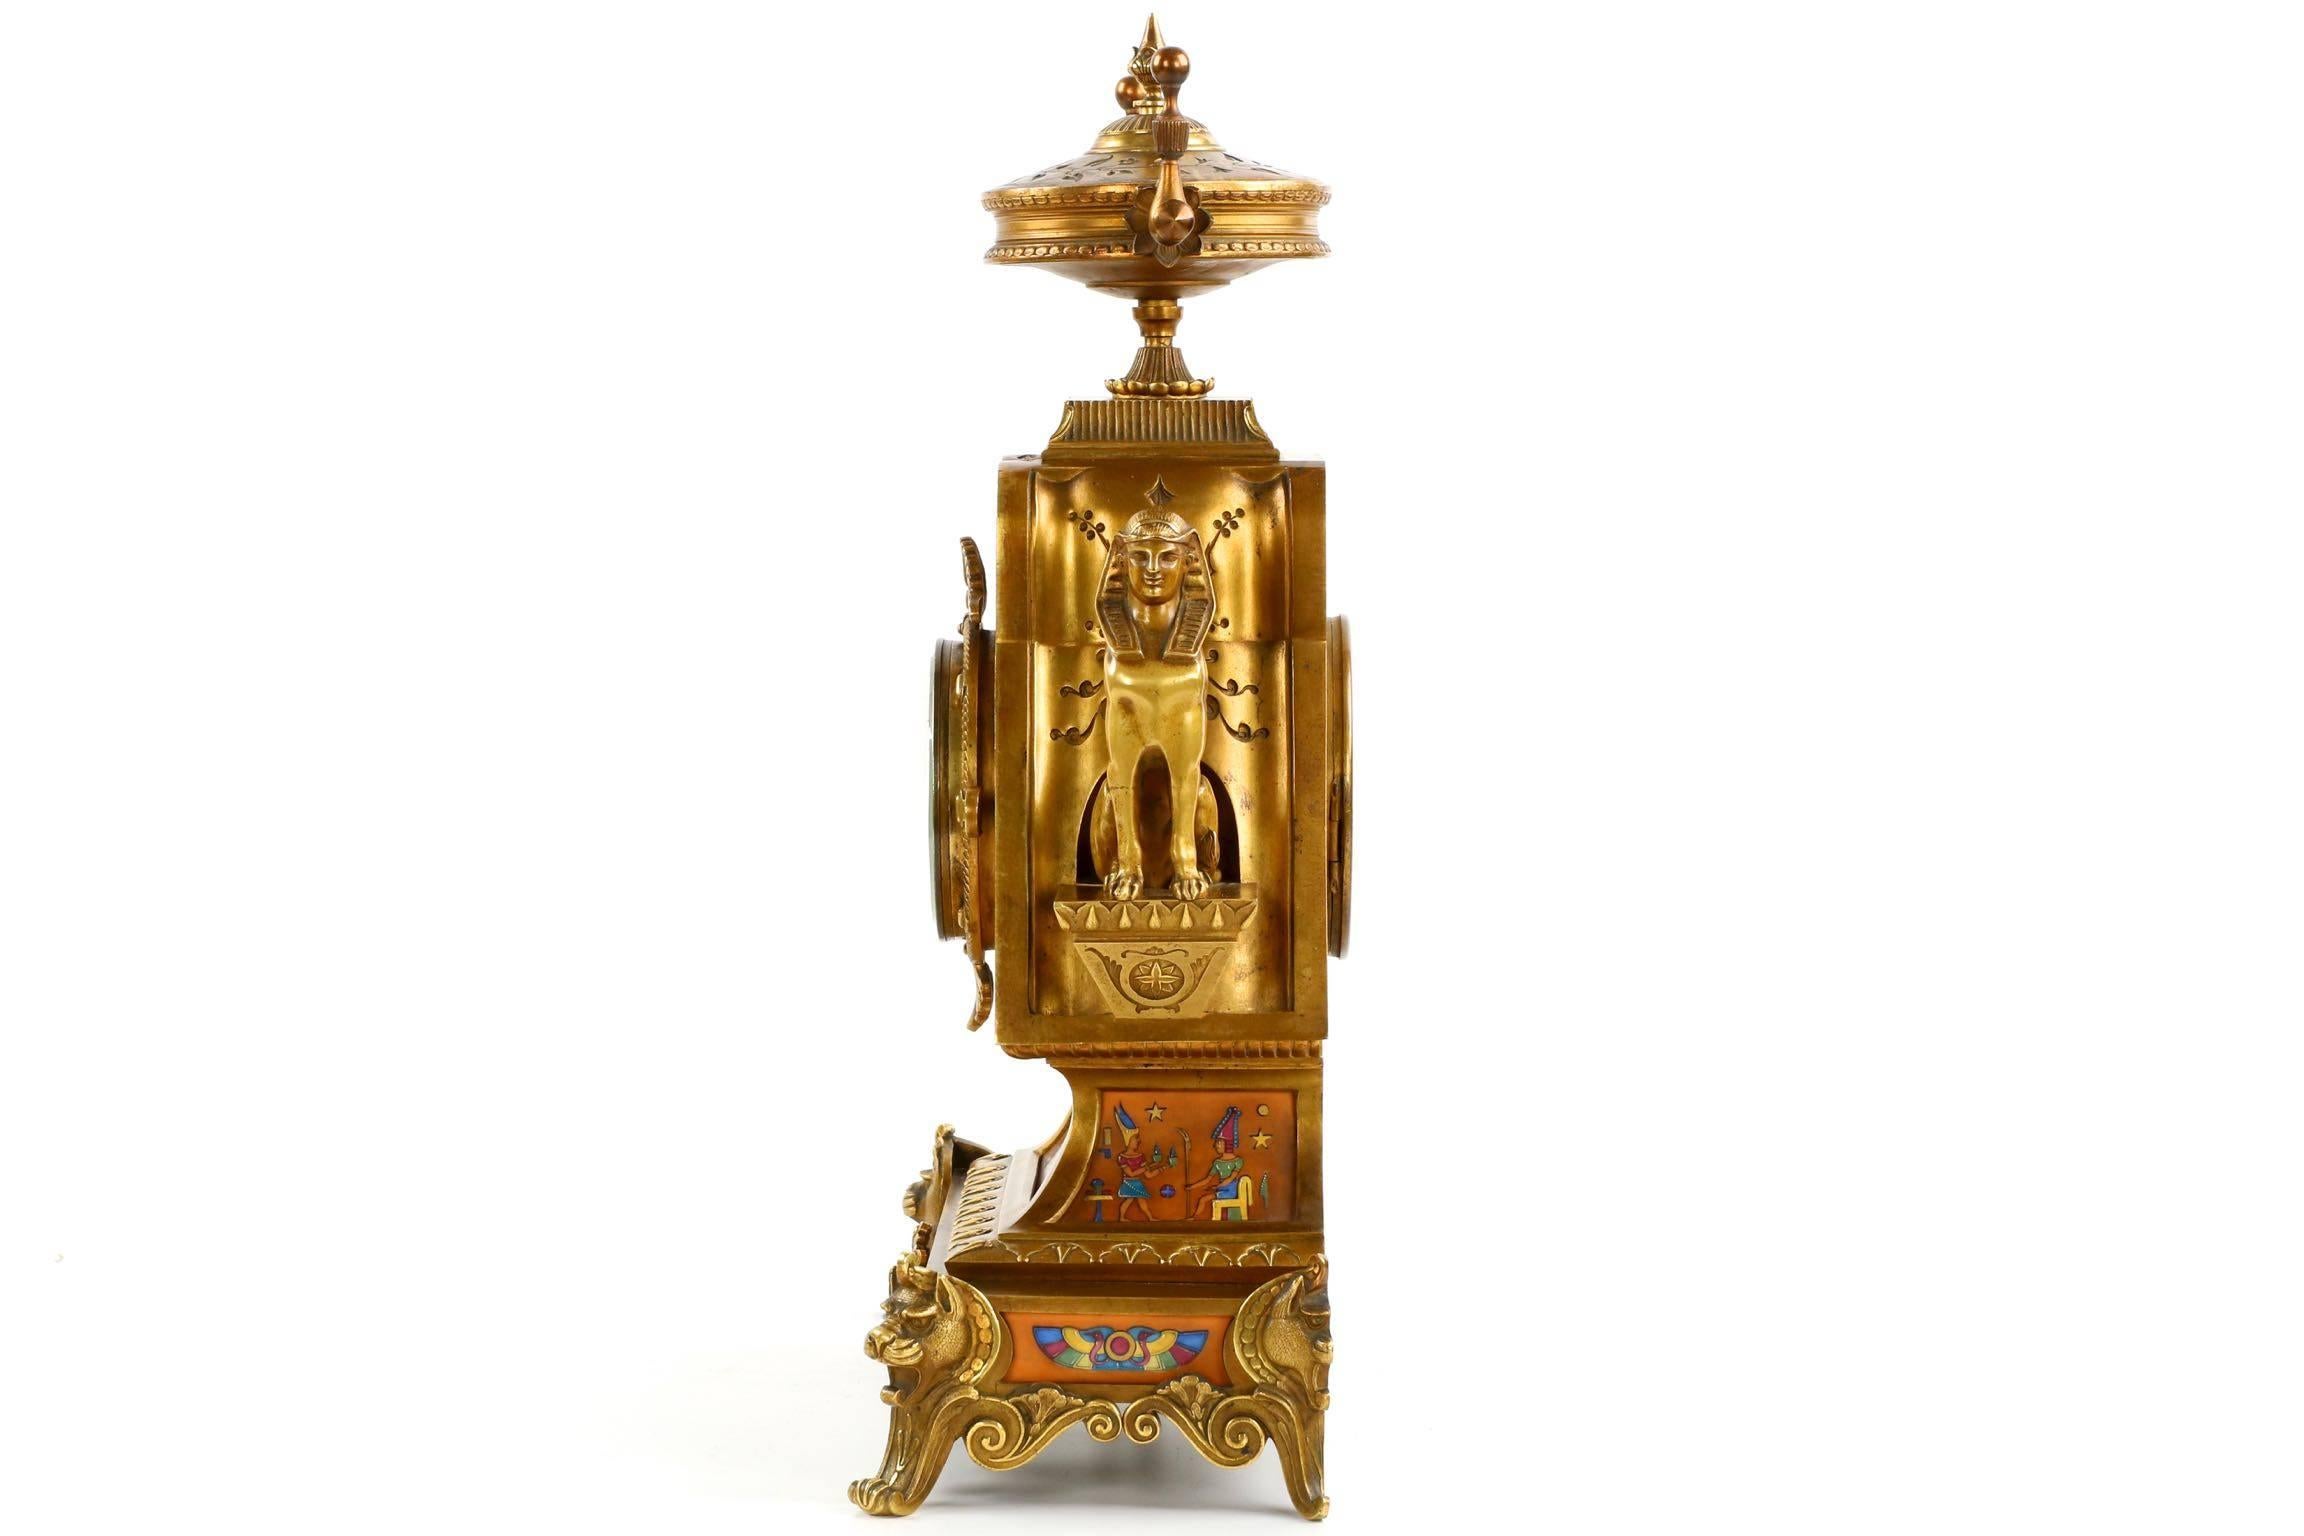 A work of an unusually whimsical Egyptian inspiration, this exceedingly fine matched candelabra and clock set exhibit powerful pictorial scenes of priests, enthroned royalty, the stylized animal depictions and other naturalistic interpretations of